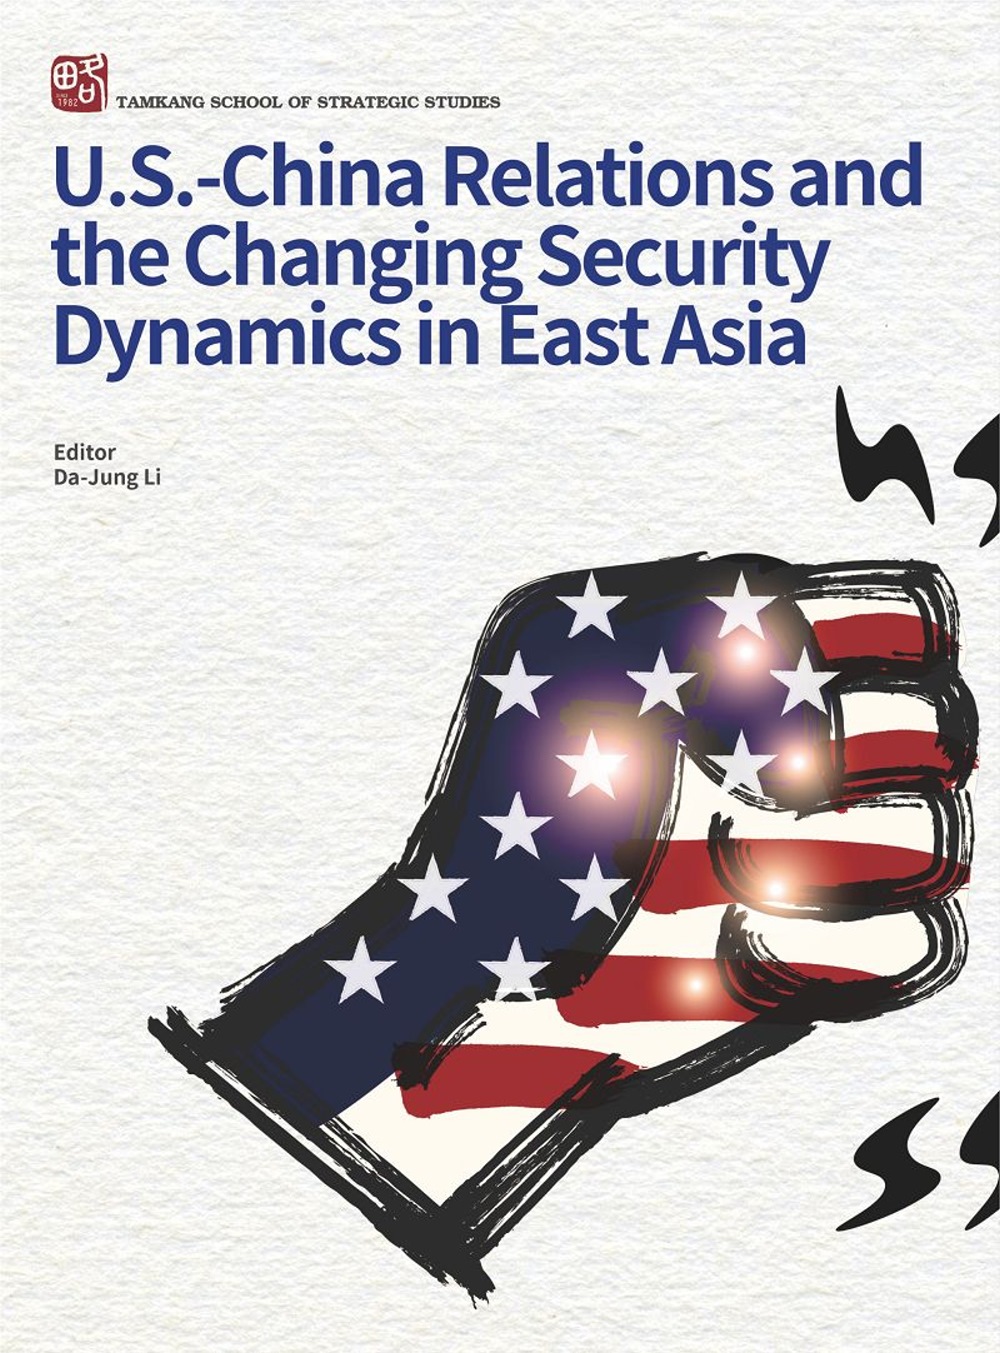 U.S-China Relations and the Changing Security Dynamics in East Asia